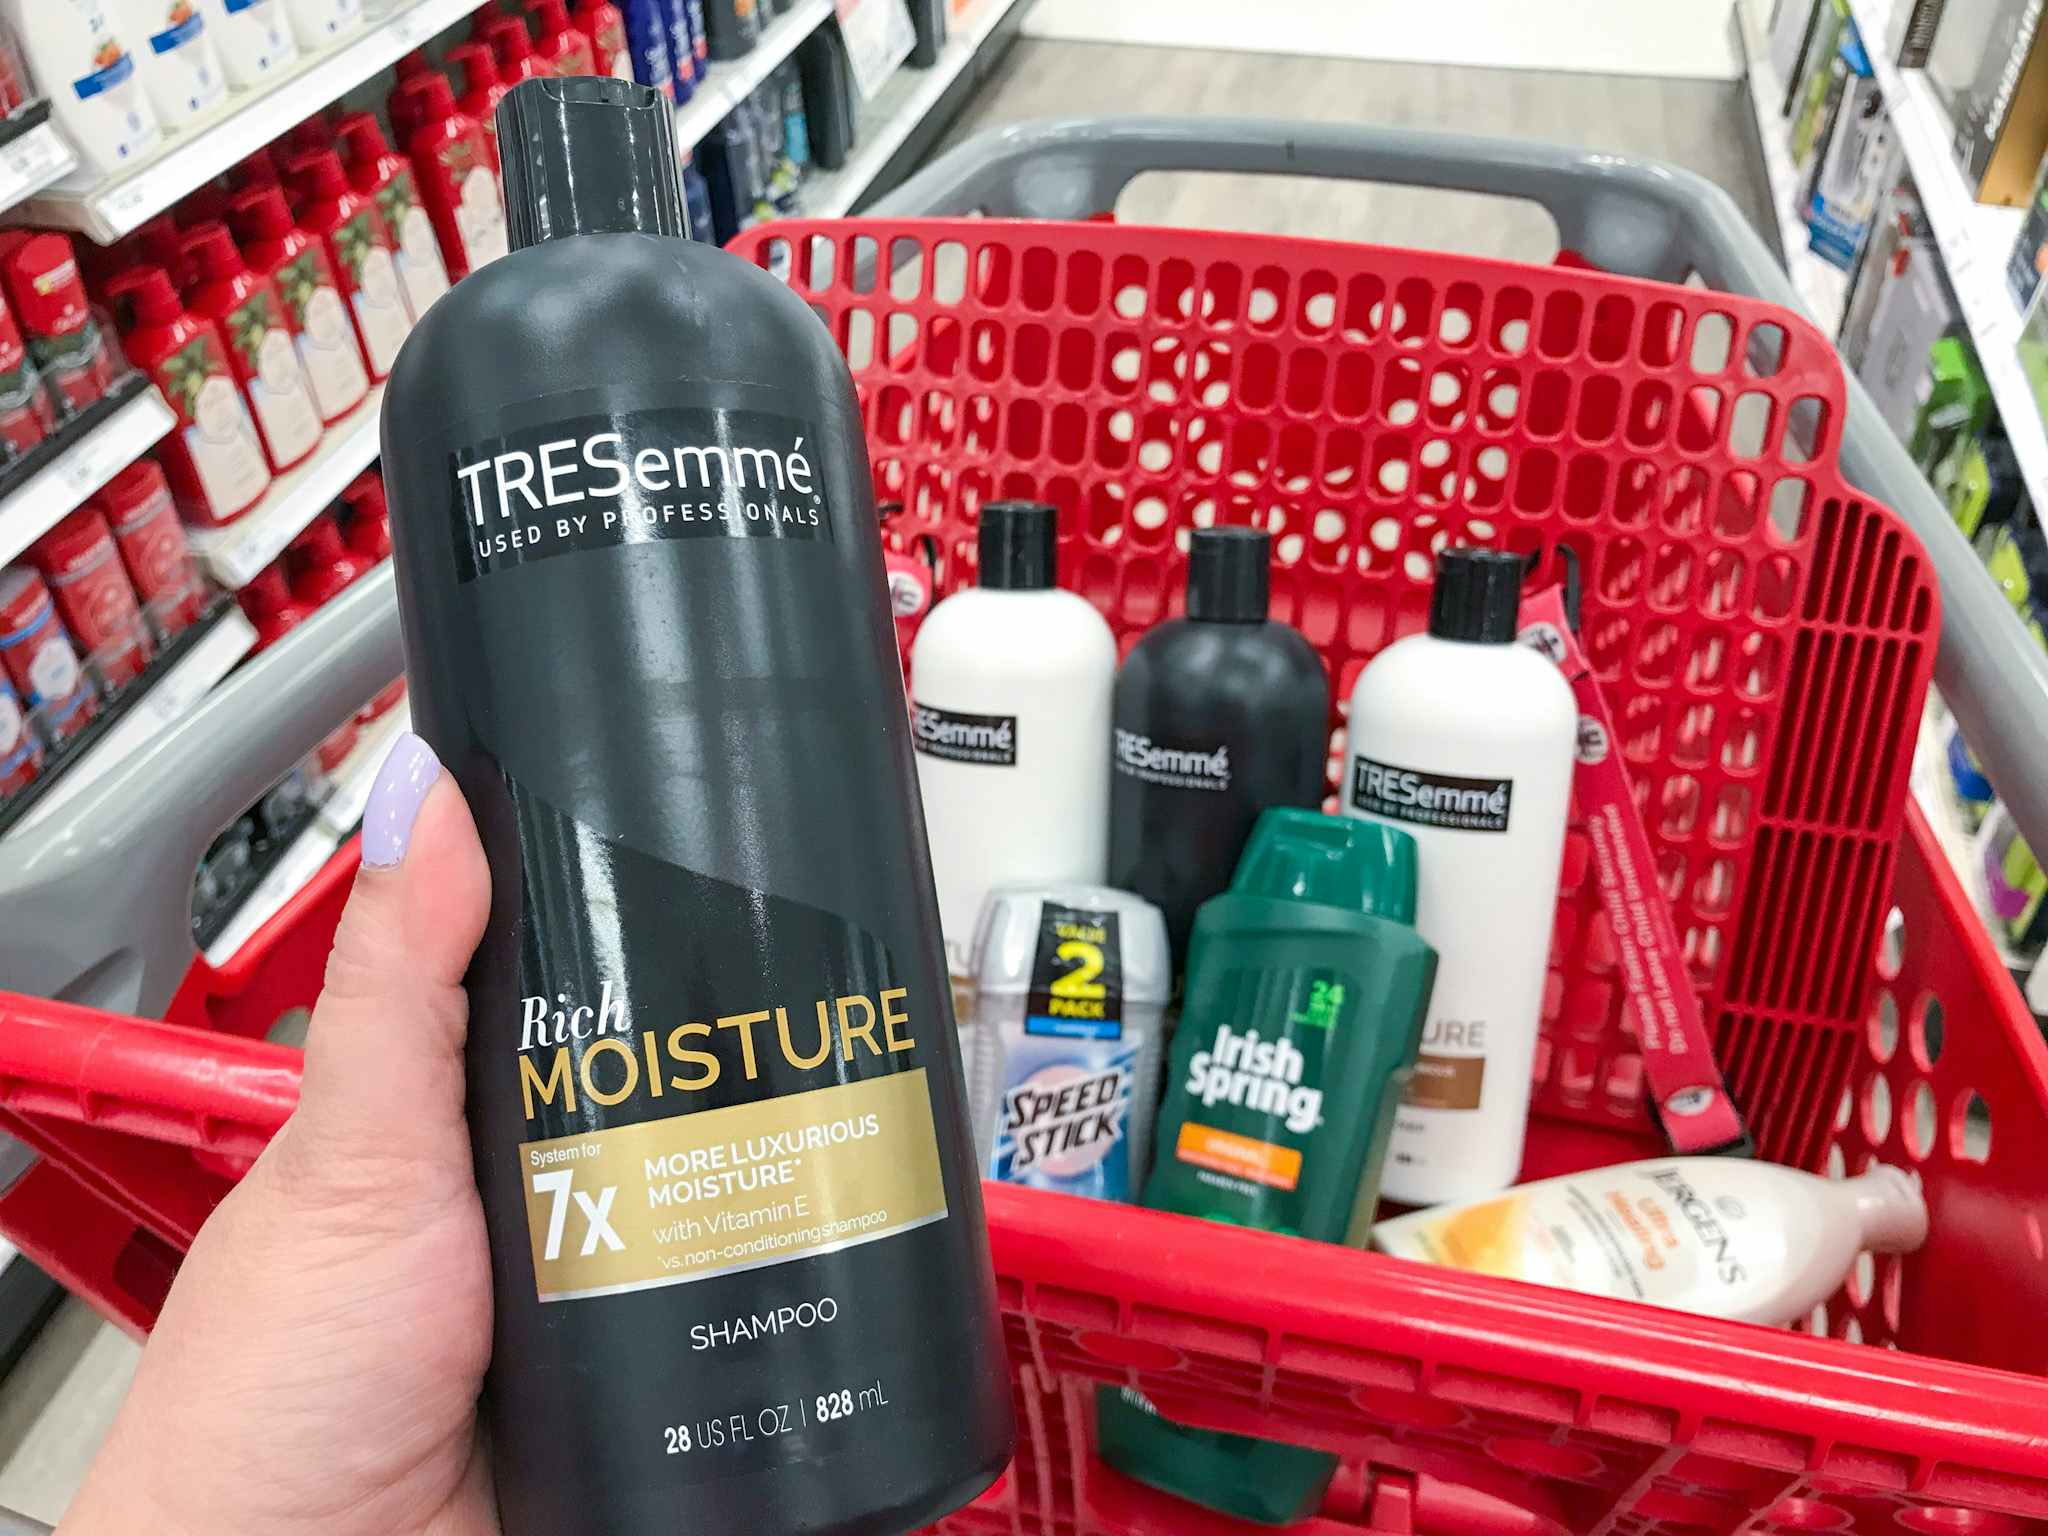 tresemme irish spring speed stick and jergens target shopping haul